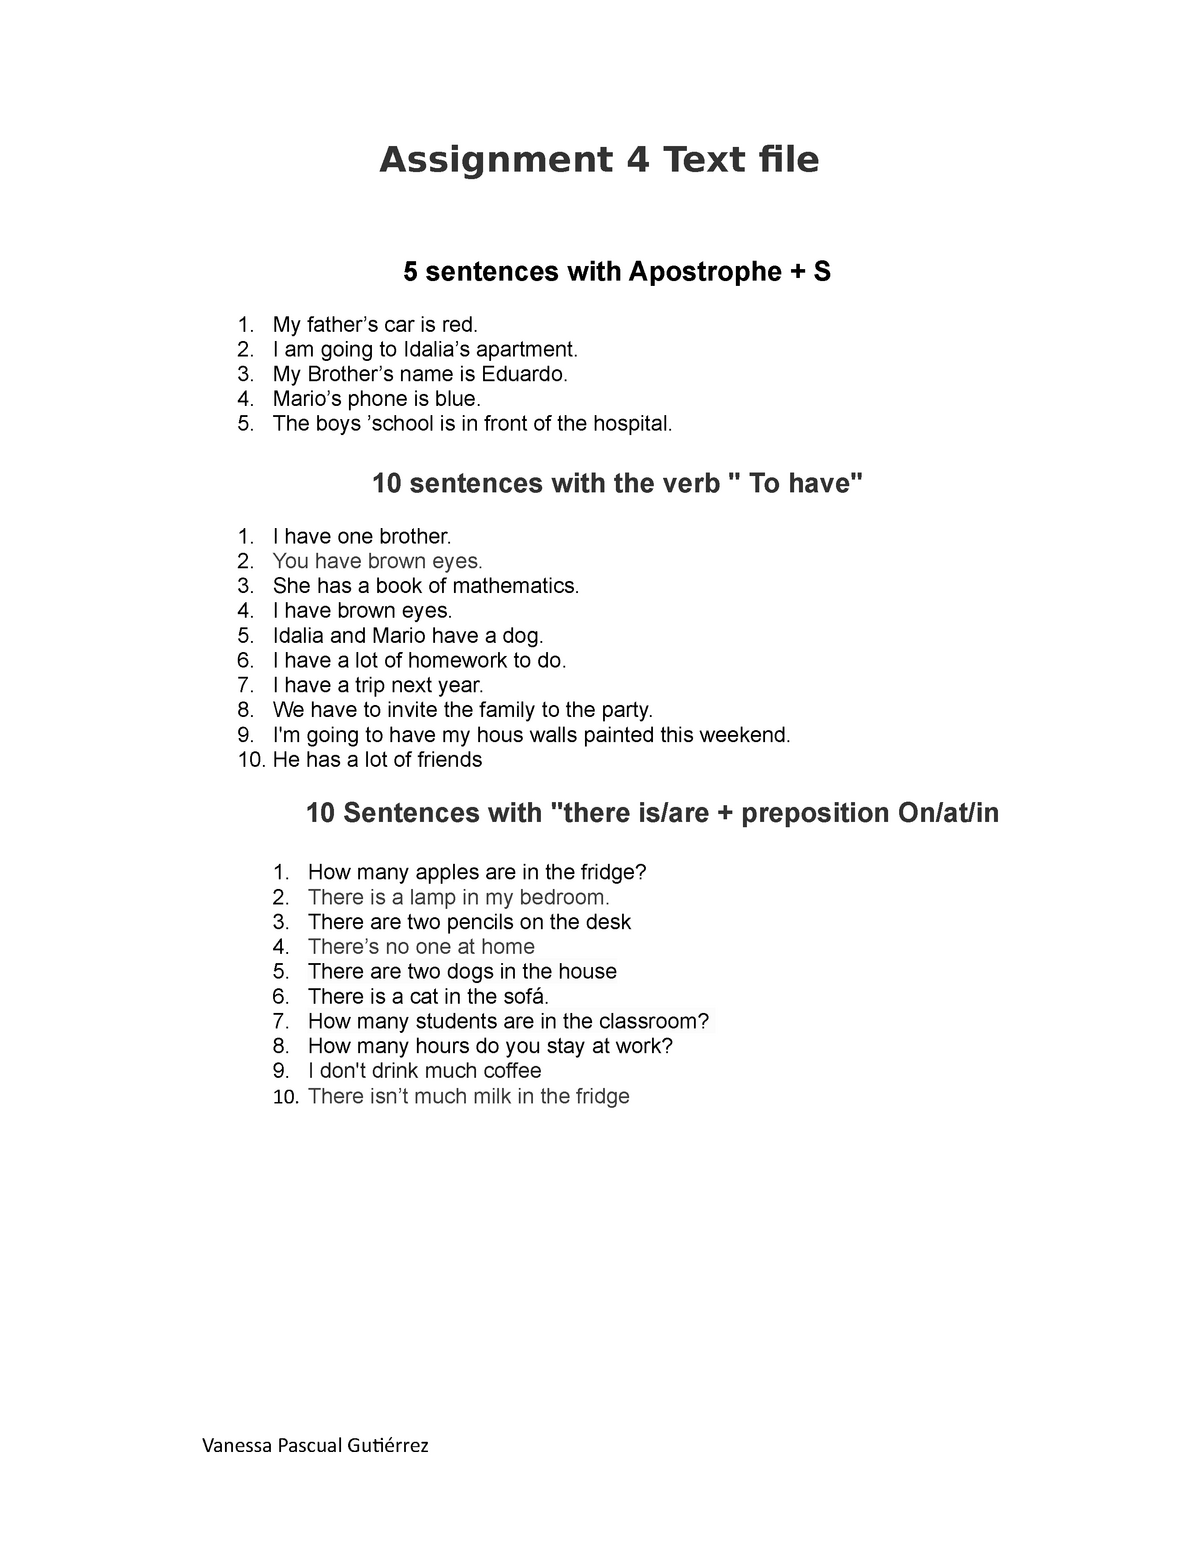 assignment 4 text file english 2